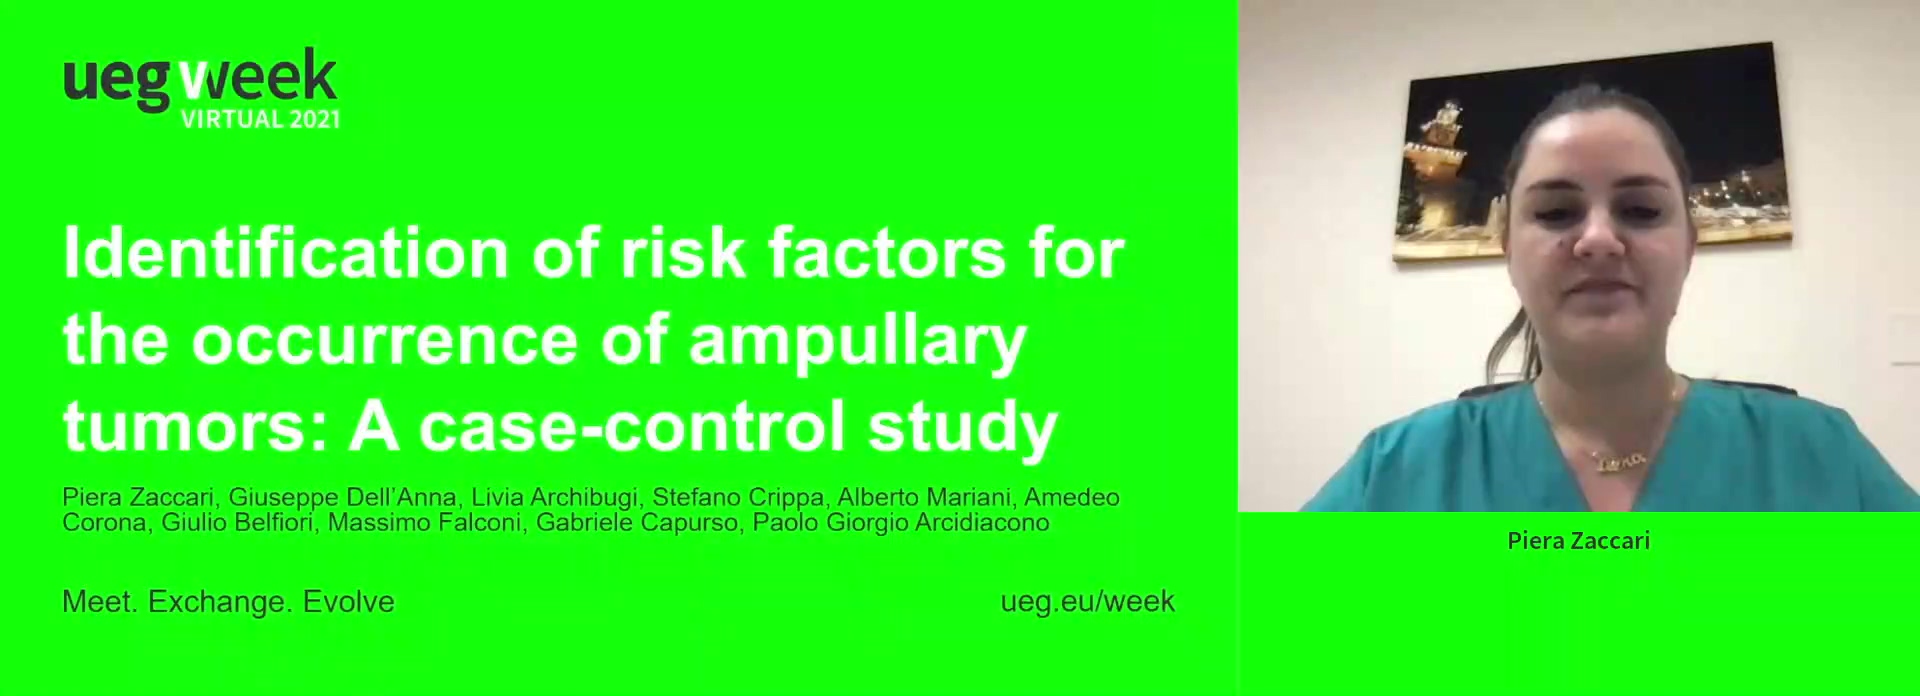 IDENTIFICATION OF RISK FACTORS FOR THE OCCURRENCE OF AMPULLARY TUMORS: A CASE-CONTROL STUDY